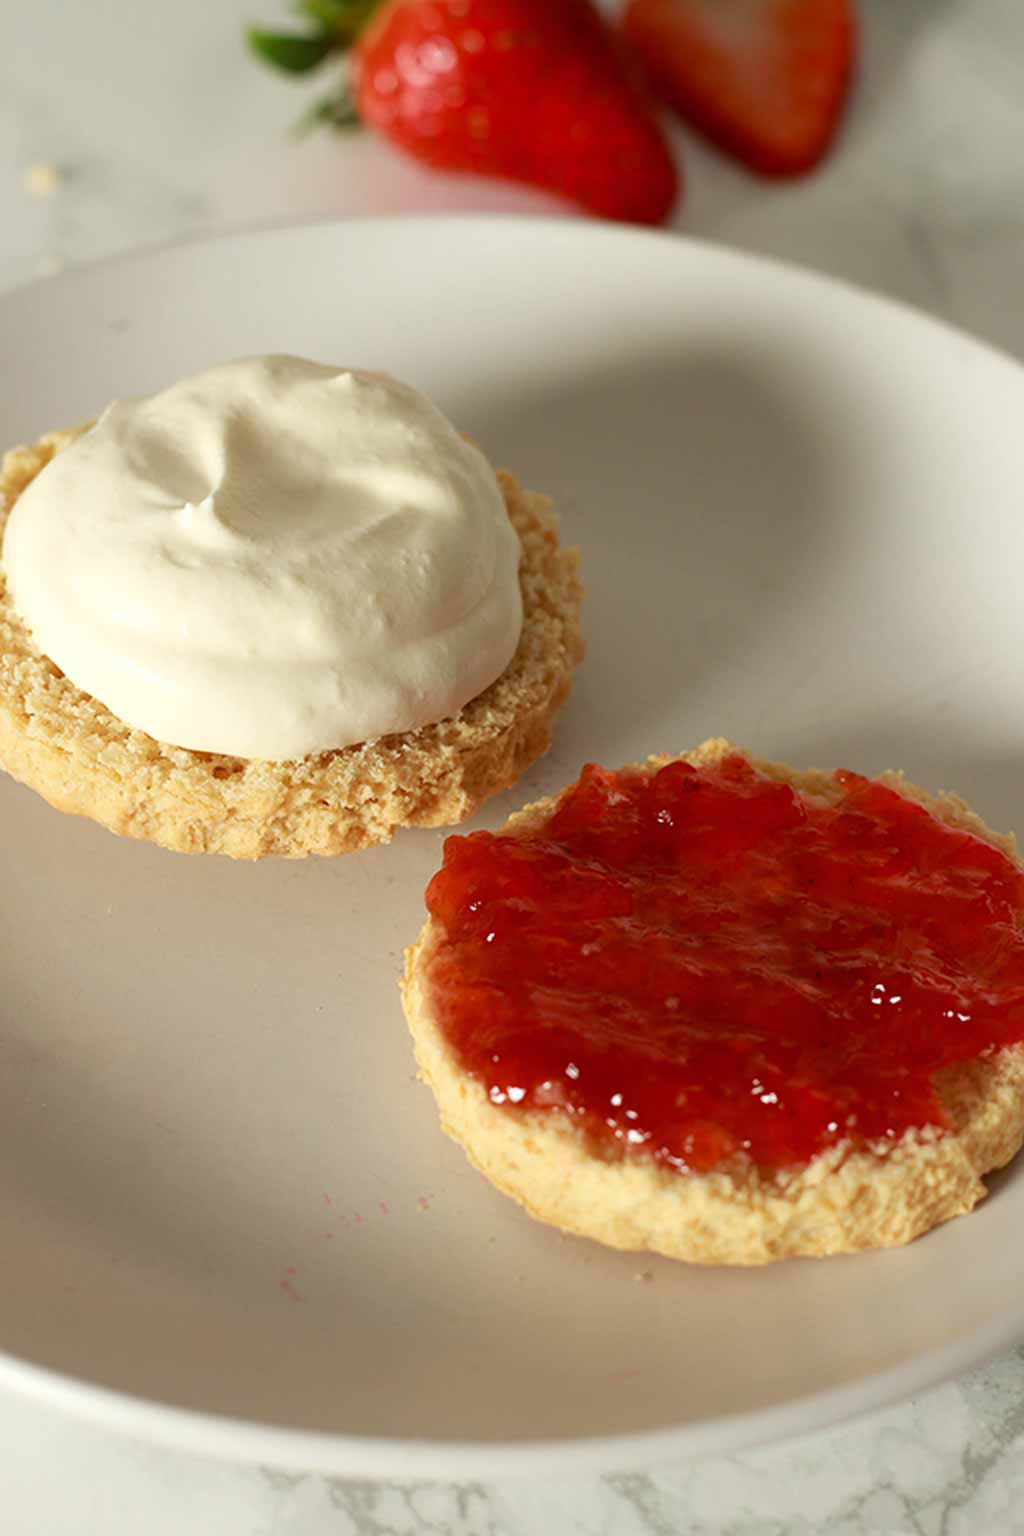 Two Halves Of A Scone On A White Plate. One Has Jam On It And The Other Has Cream On It.